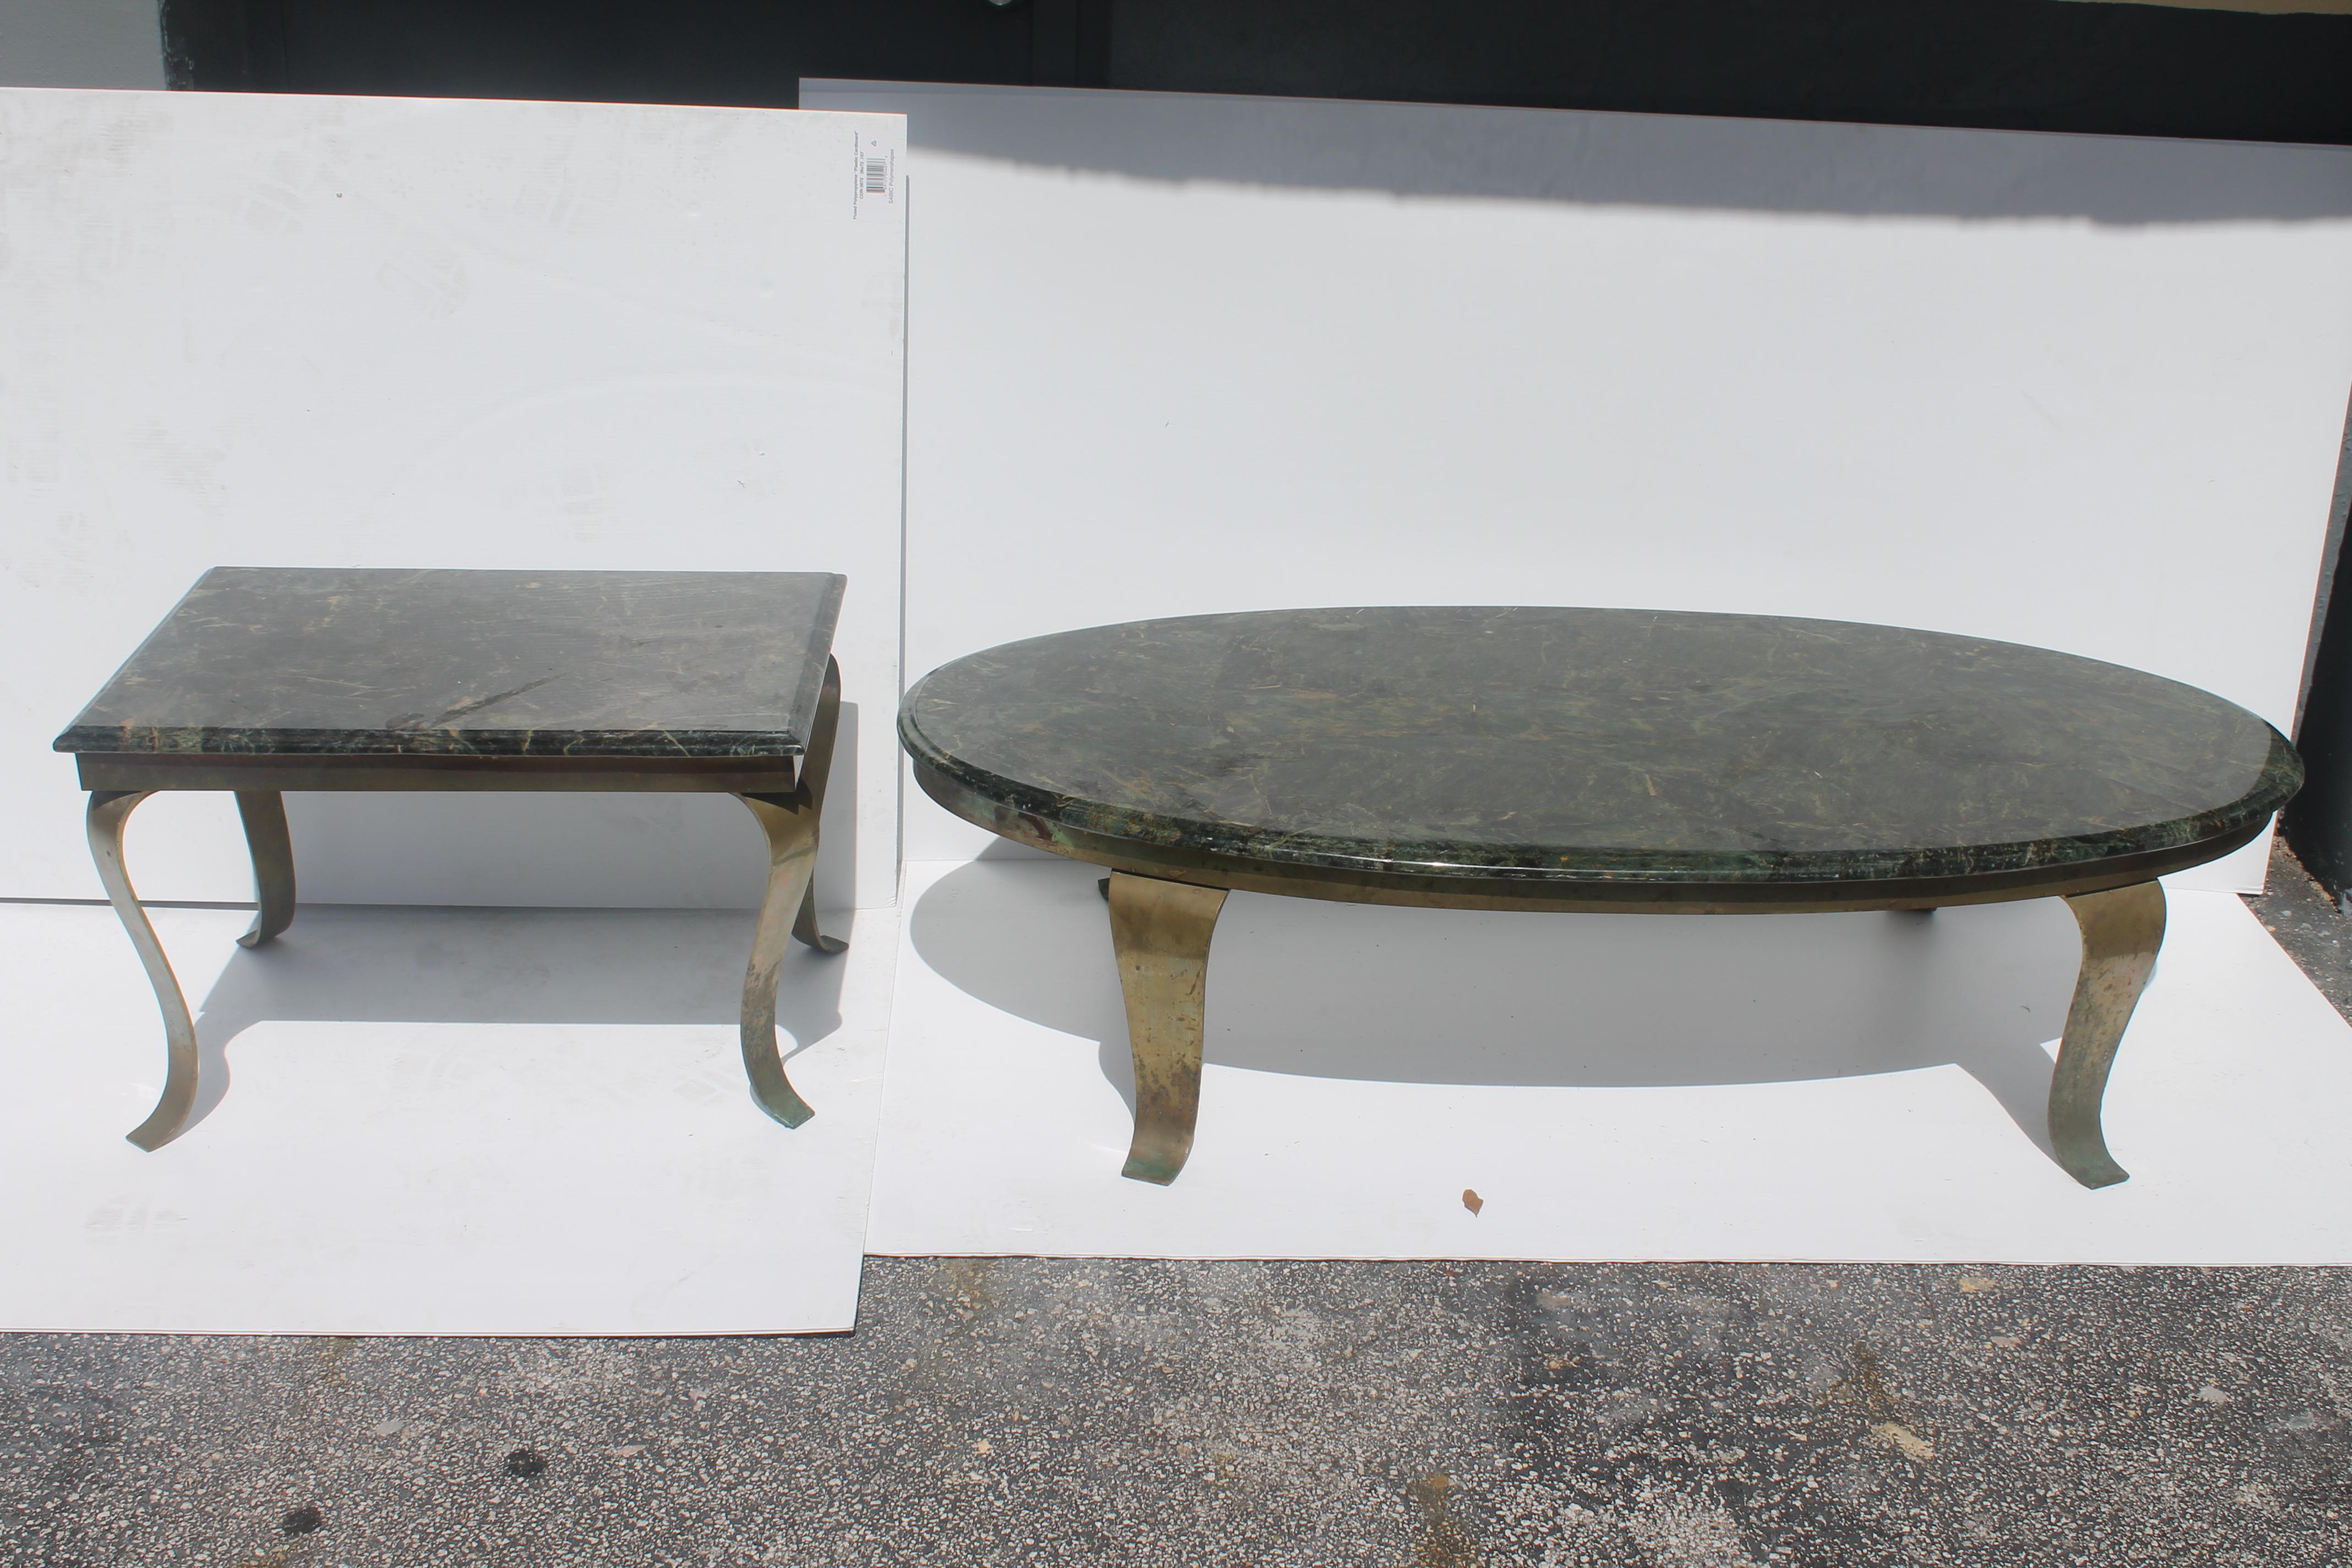 c1960's Mid Century Modern Cultured Marble Coffee Table with Matching Side/ Accent Table by Famed Mexican Designer 